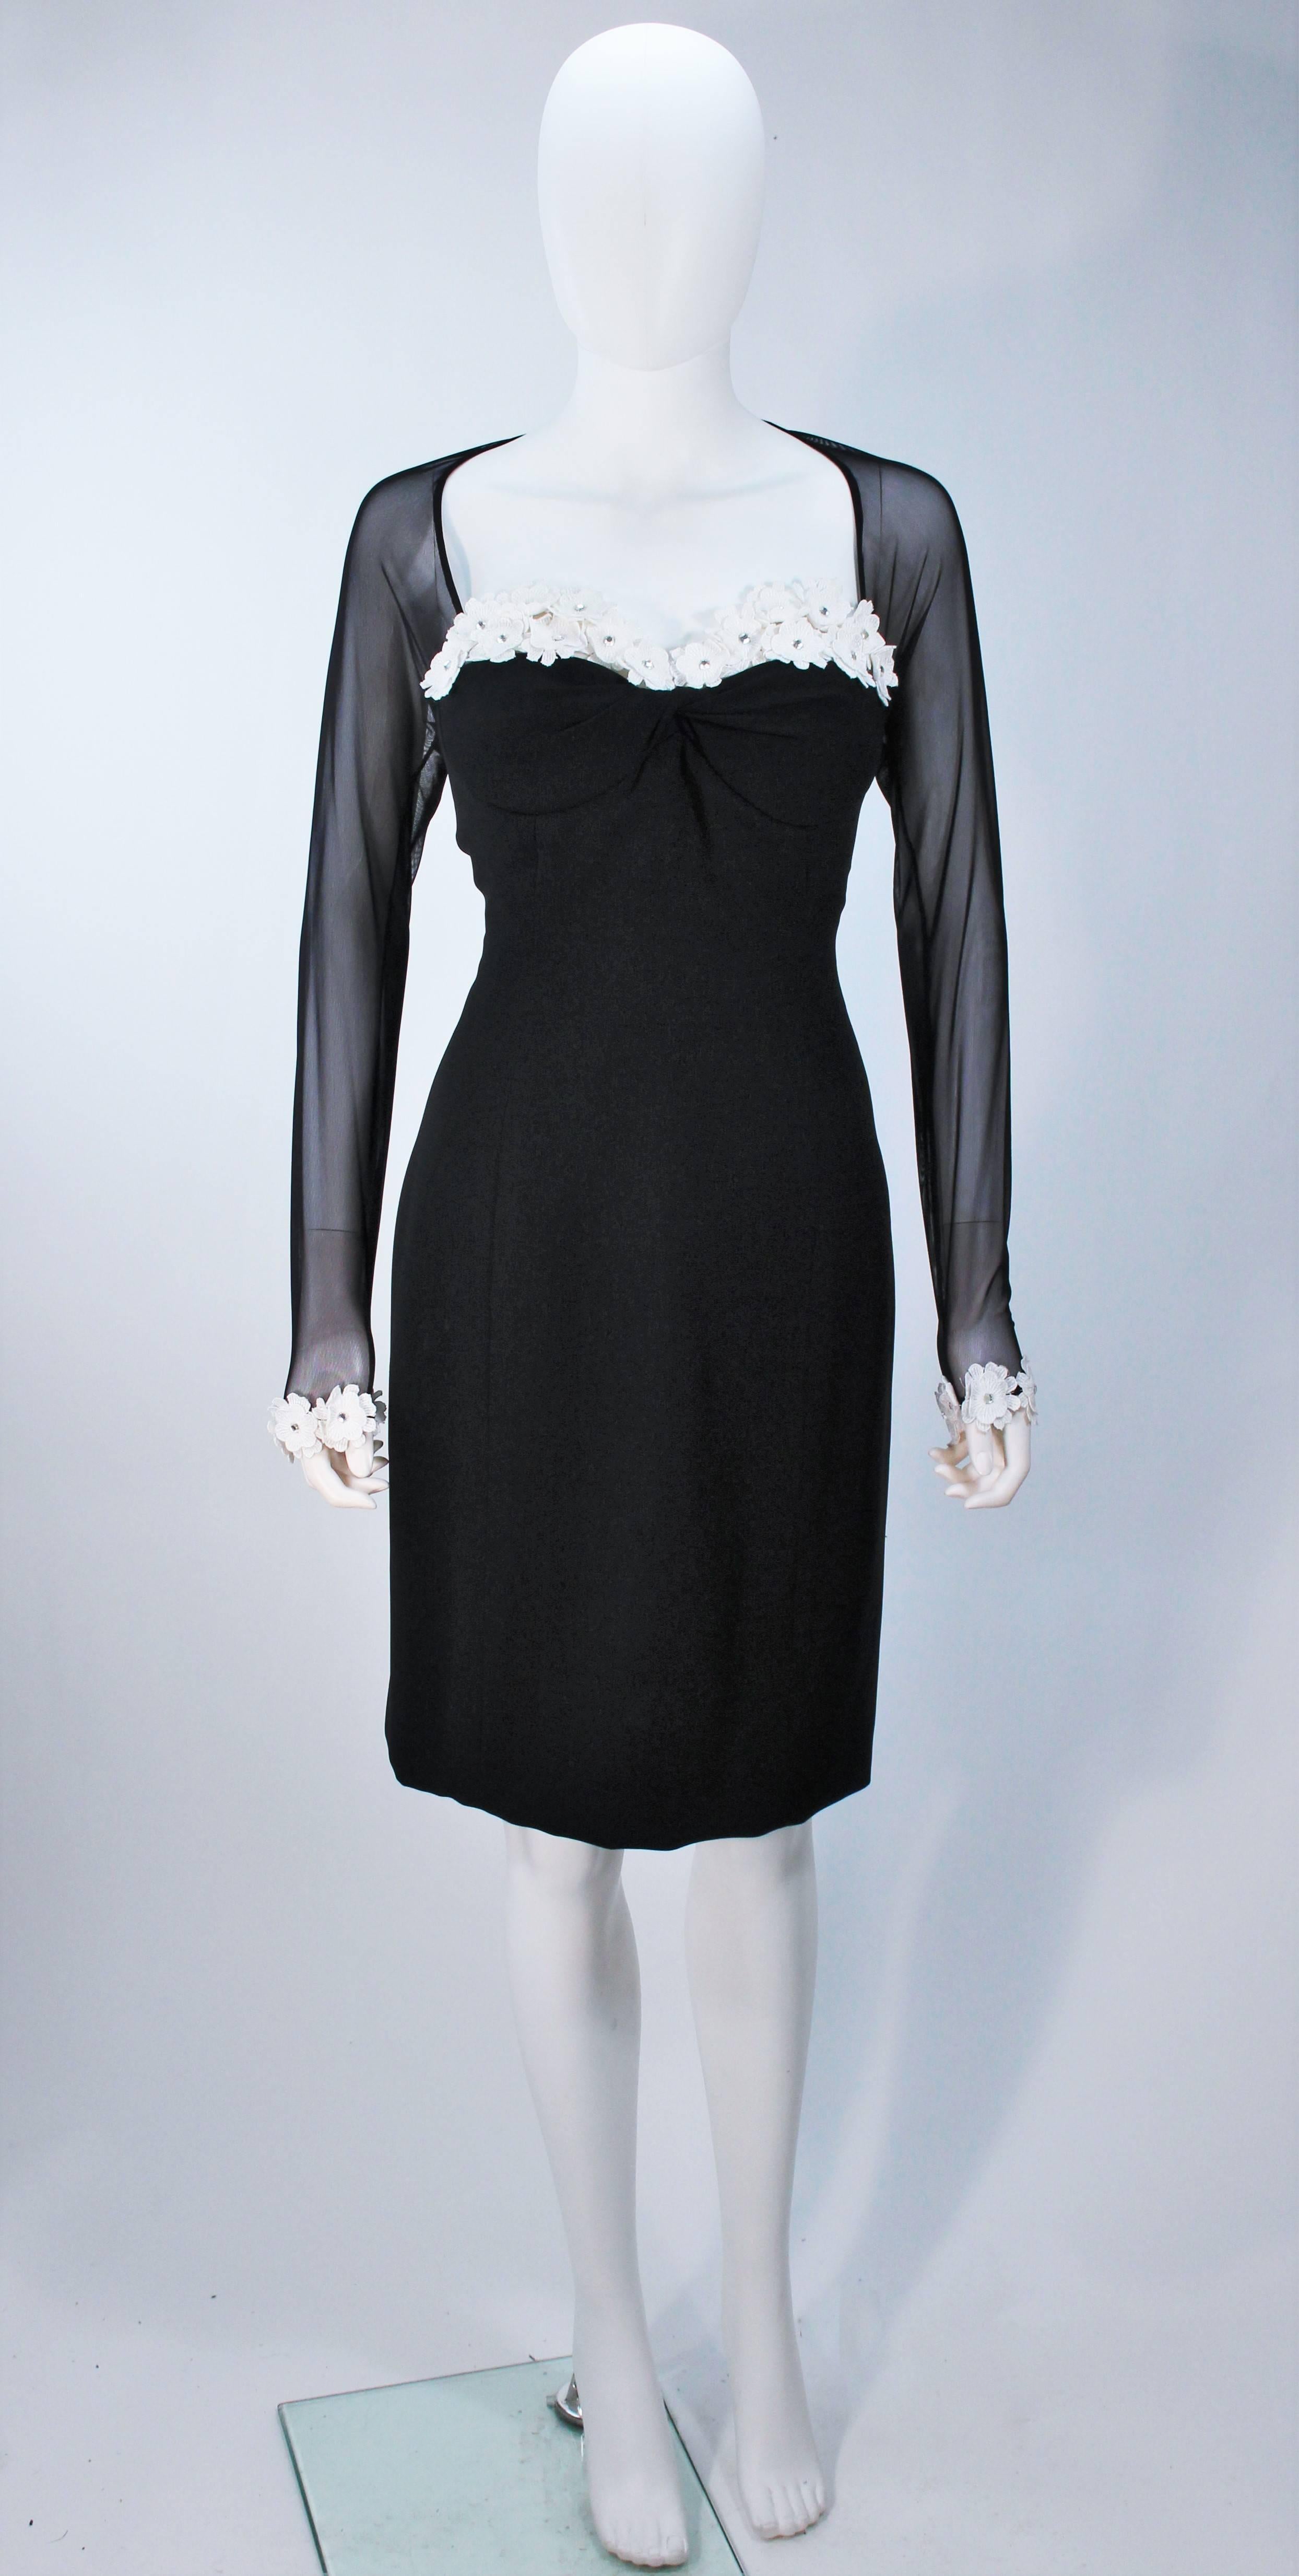  This Travilla  lovely black cocktail dress with long sleeves by Travilla from the 1980's. The Dress has a zipper in the back, floral detail on the front and on the bottom of the Sleeves. The Sleeves are sheer as well as the shoulders and back line.